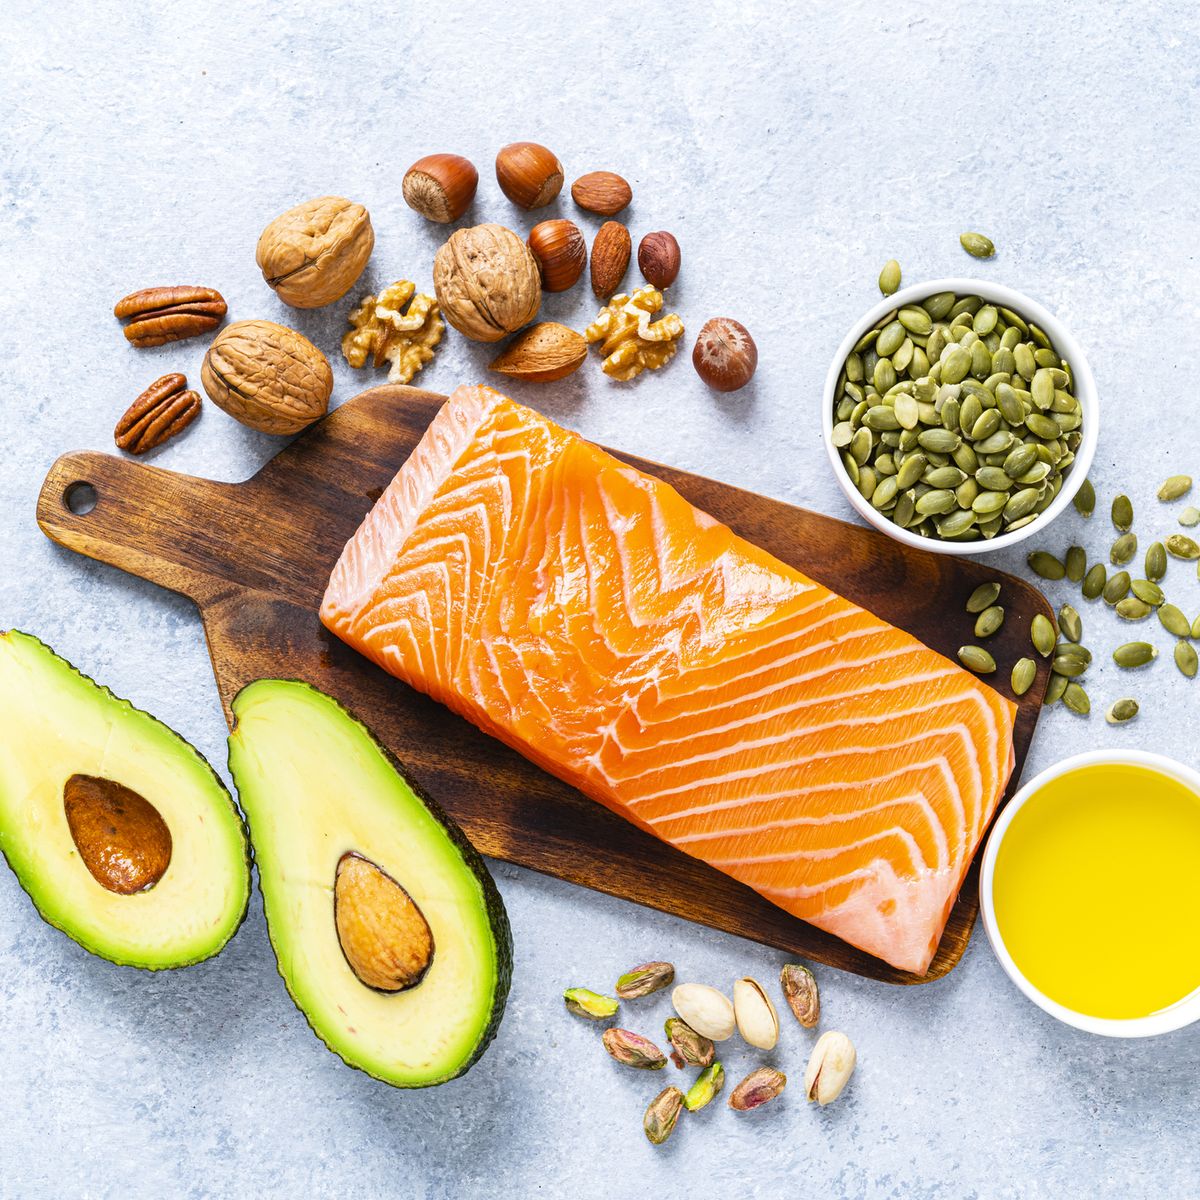 III. Different Types of Fats for Runners